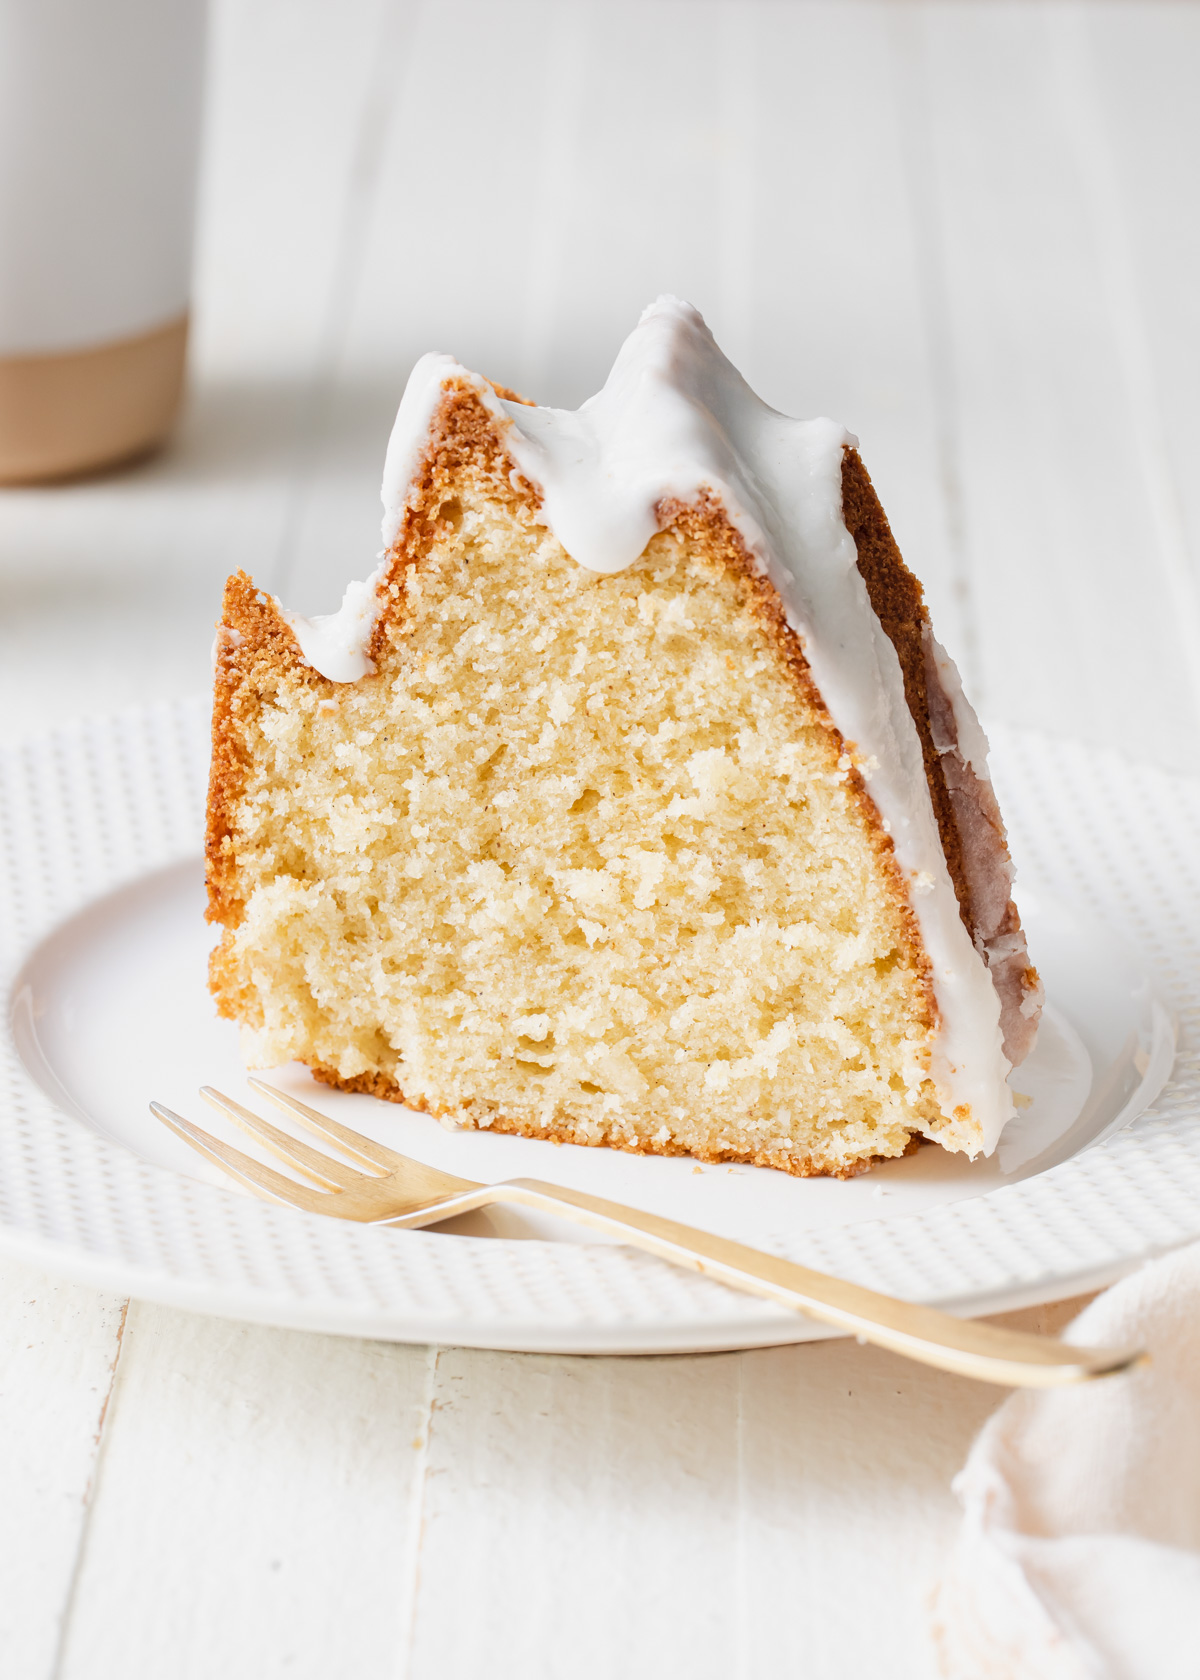 A thick slice of cardamom cake with vanilla glaze on a white plate.